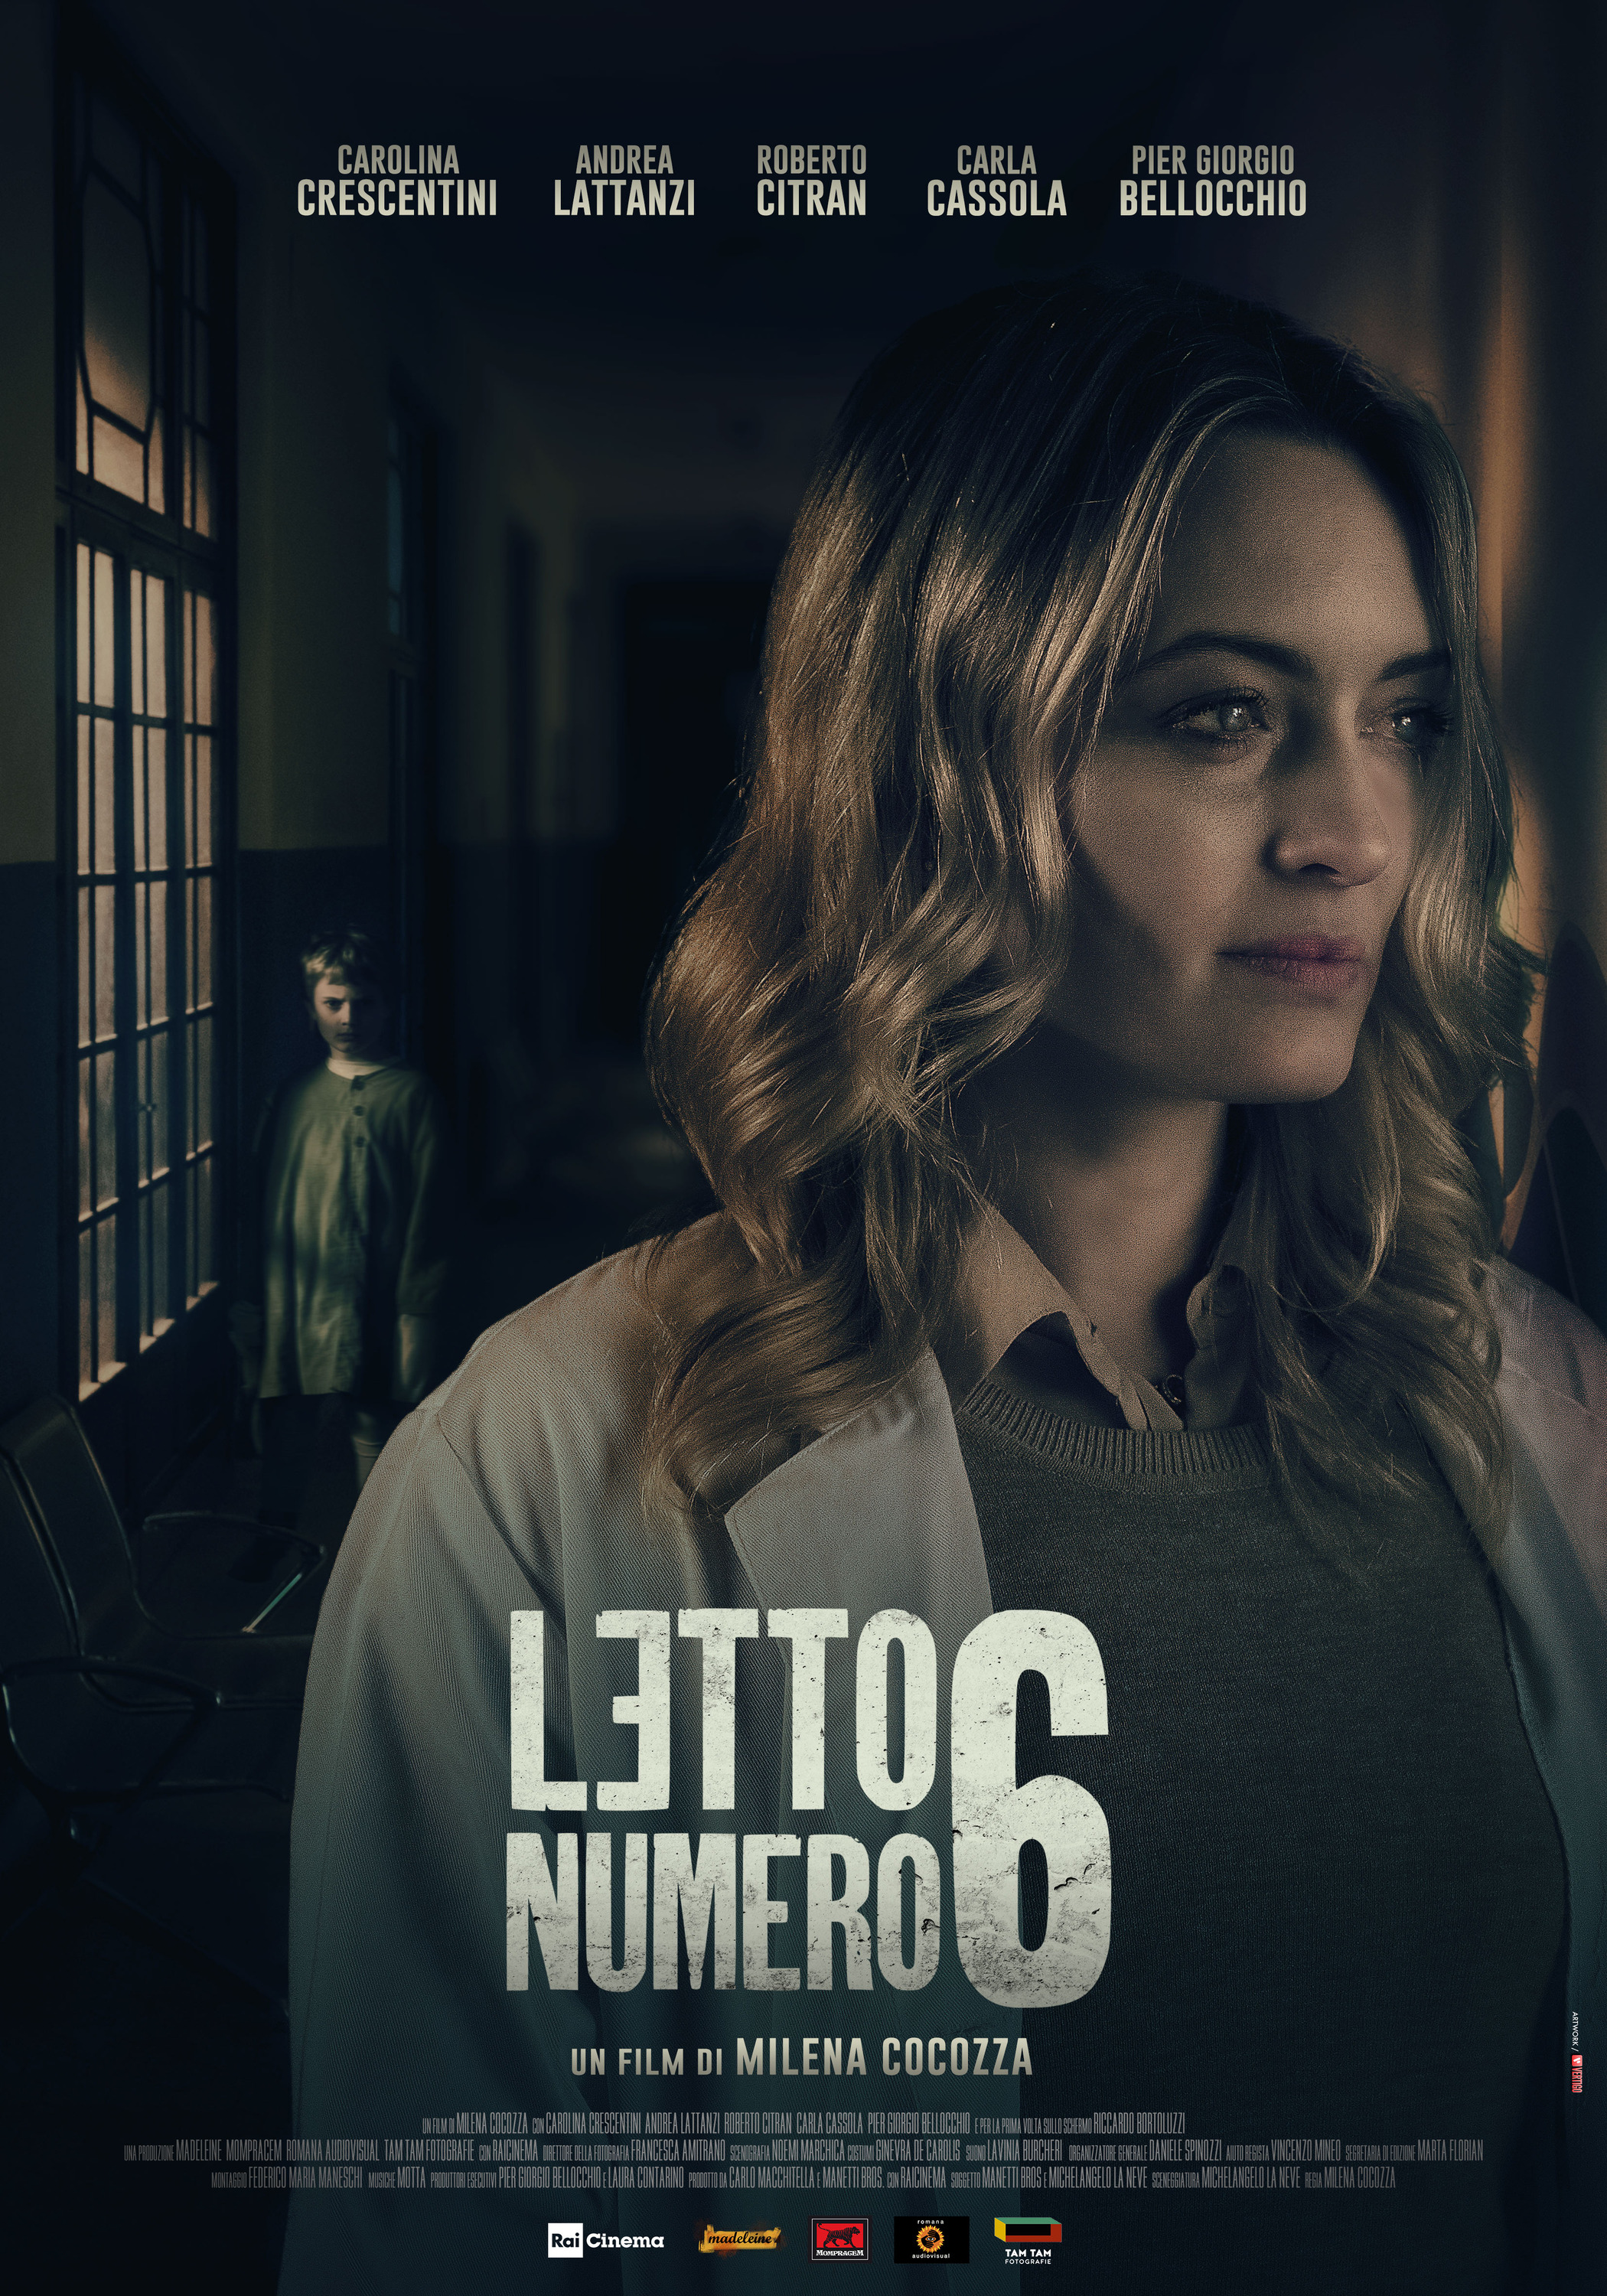 Mega Sized Movie Poster Image for Letto numero 6 (#1 of 2)